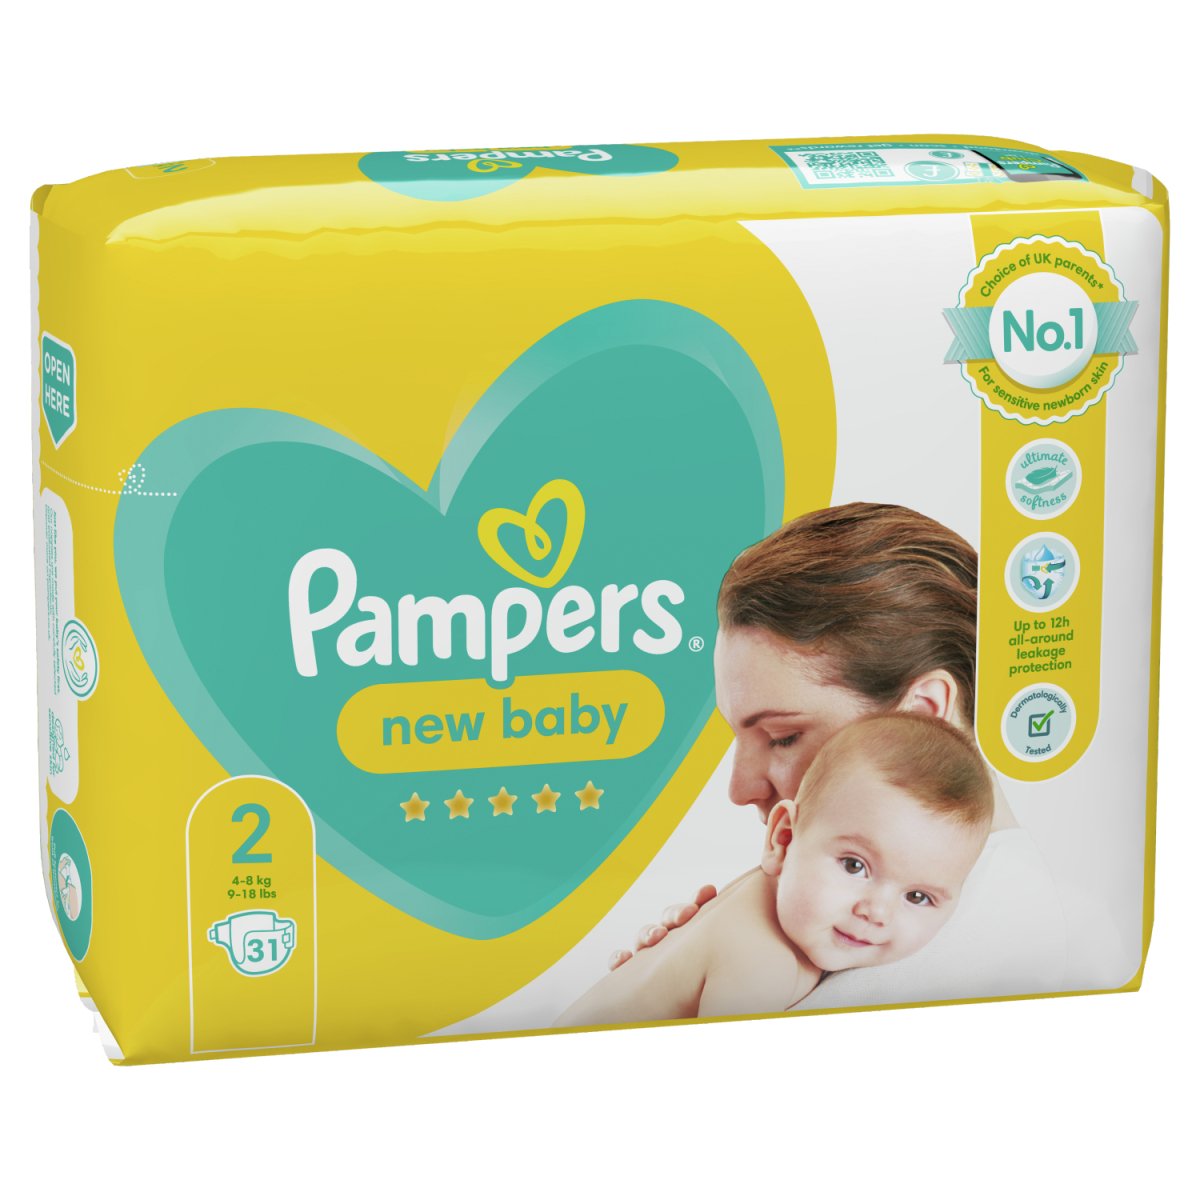 Pampers New Baby Taped Size 2 Carry Pack 31s - Intamarque - Wholesale 8001841859101